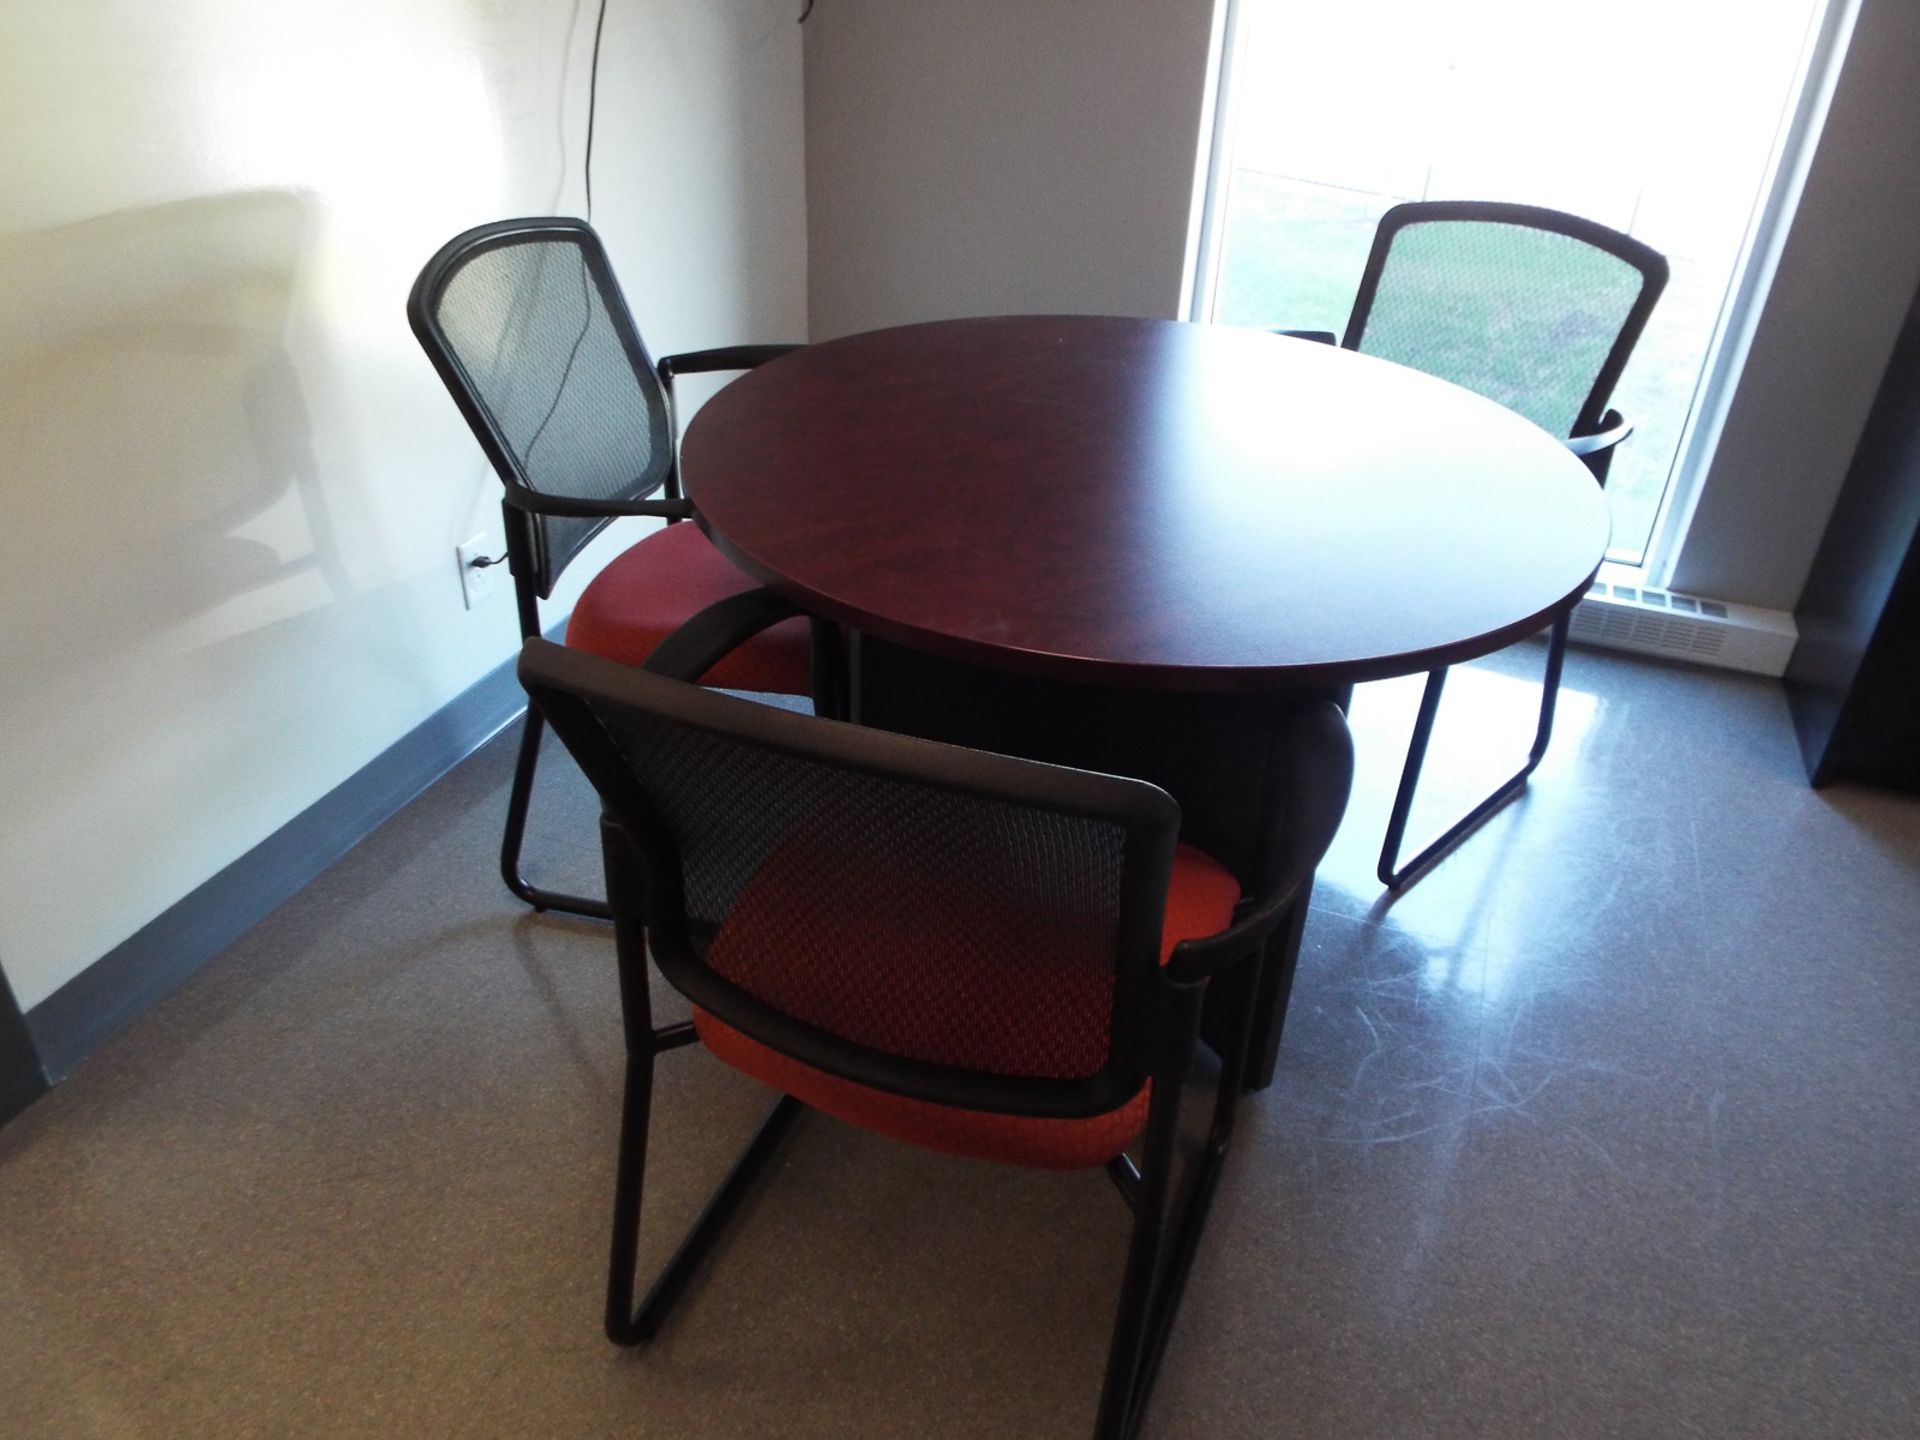 LOT/ CONTENTS OF OFFICE (FURNITURE ONLY) - OFFICE DESK WITH OFFICE CHAIRS, WALL UNIT AND ROUND - Image 2 of 2